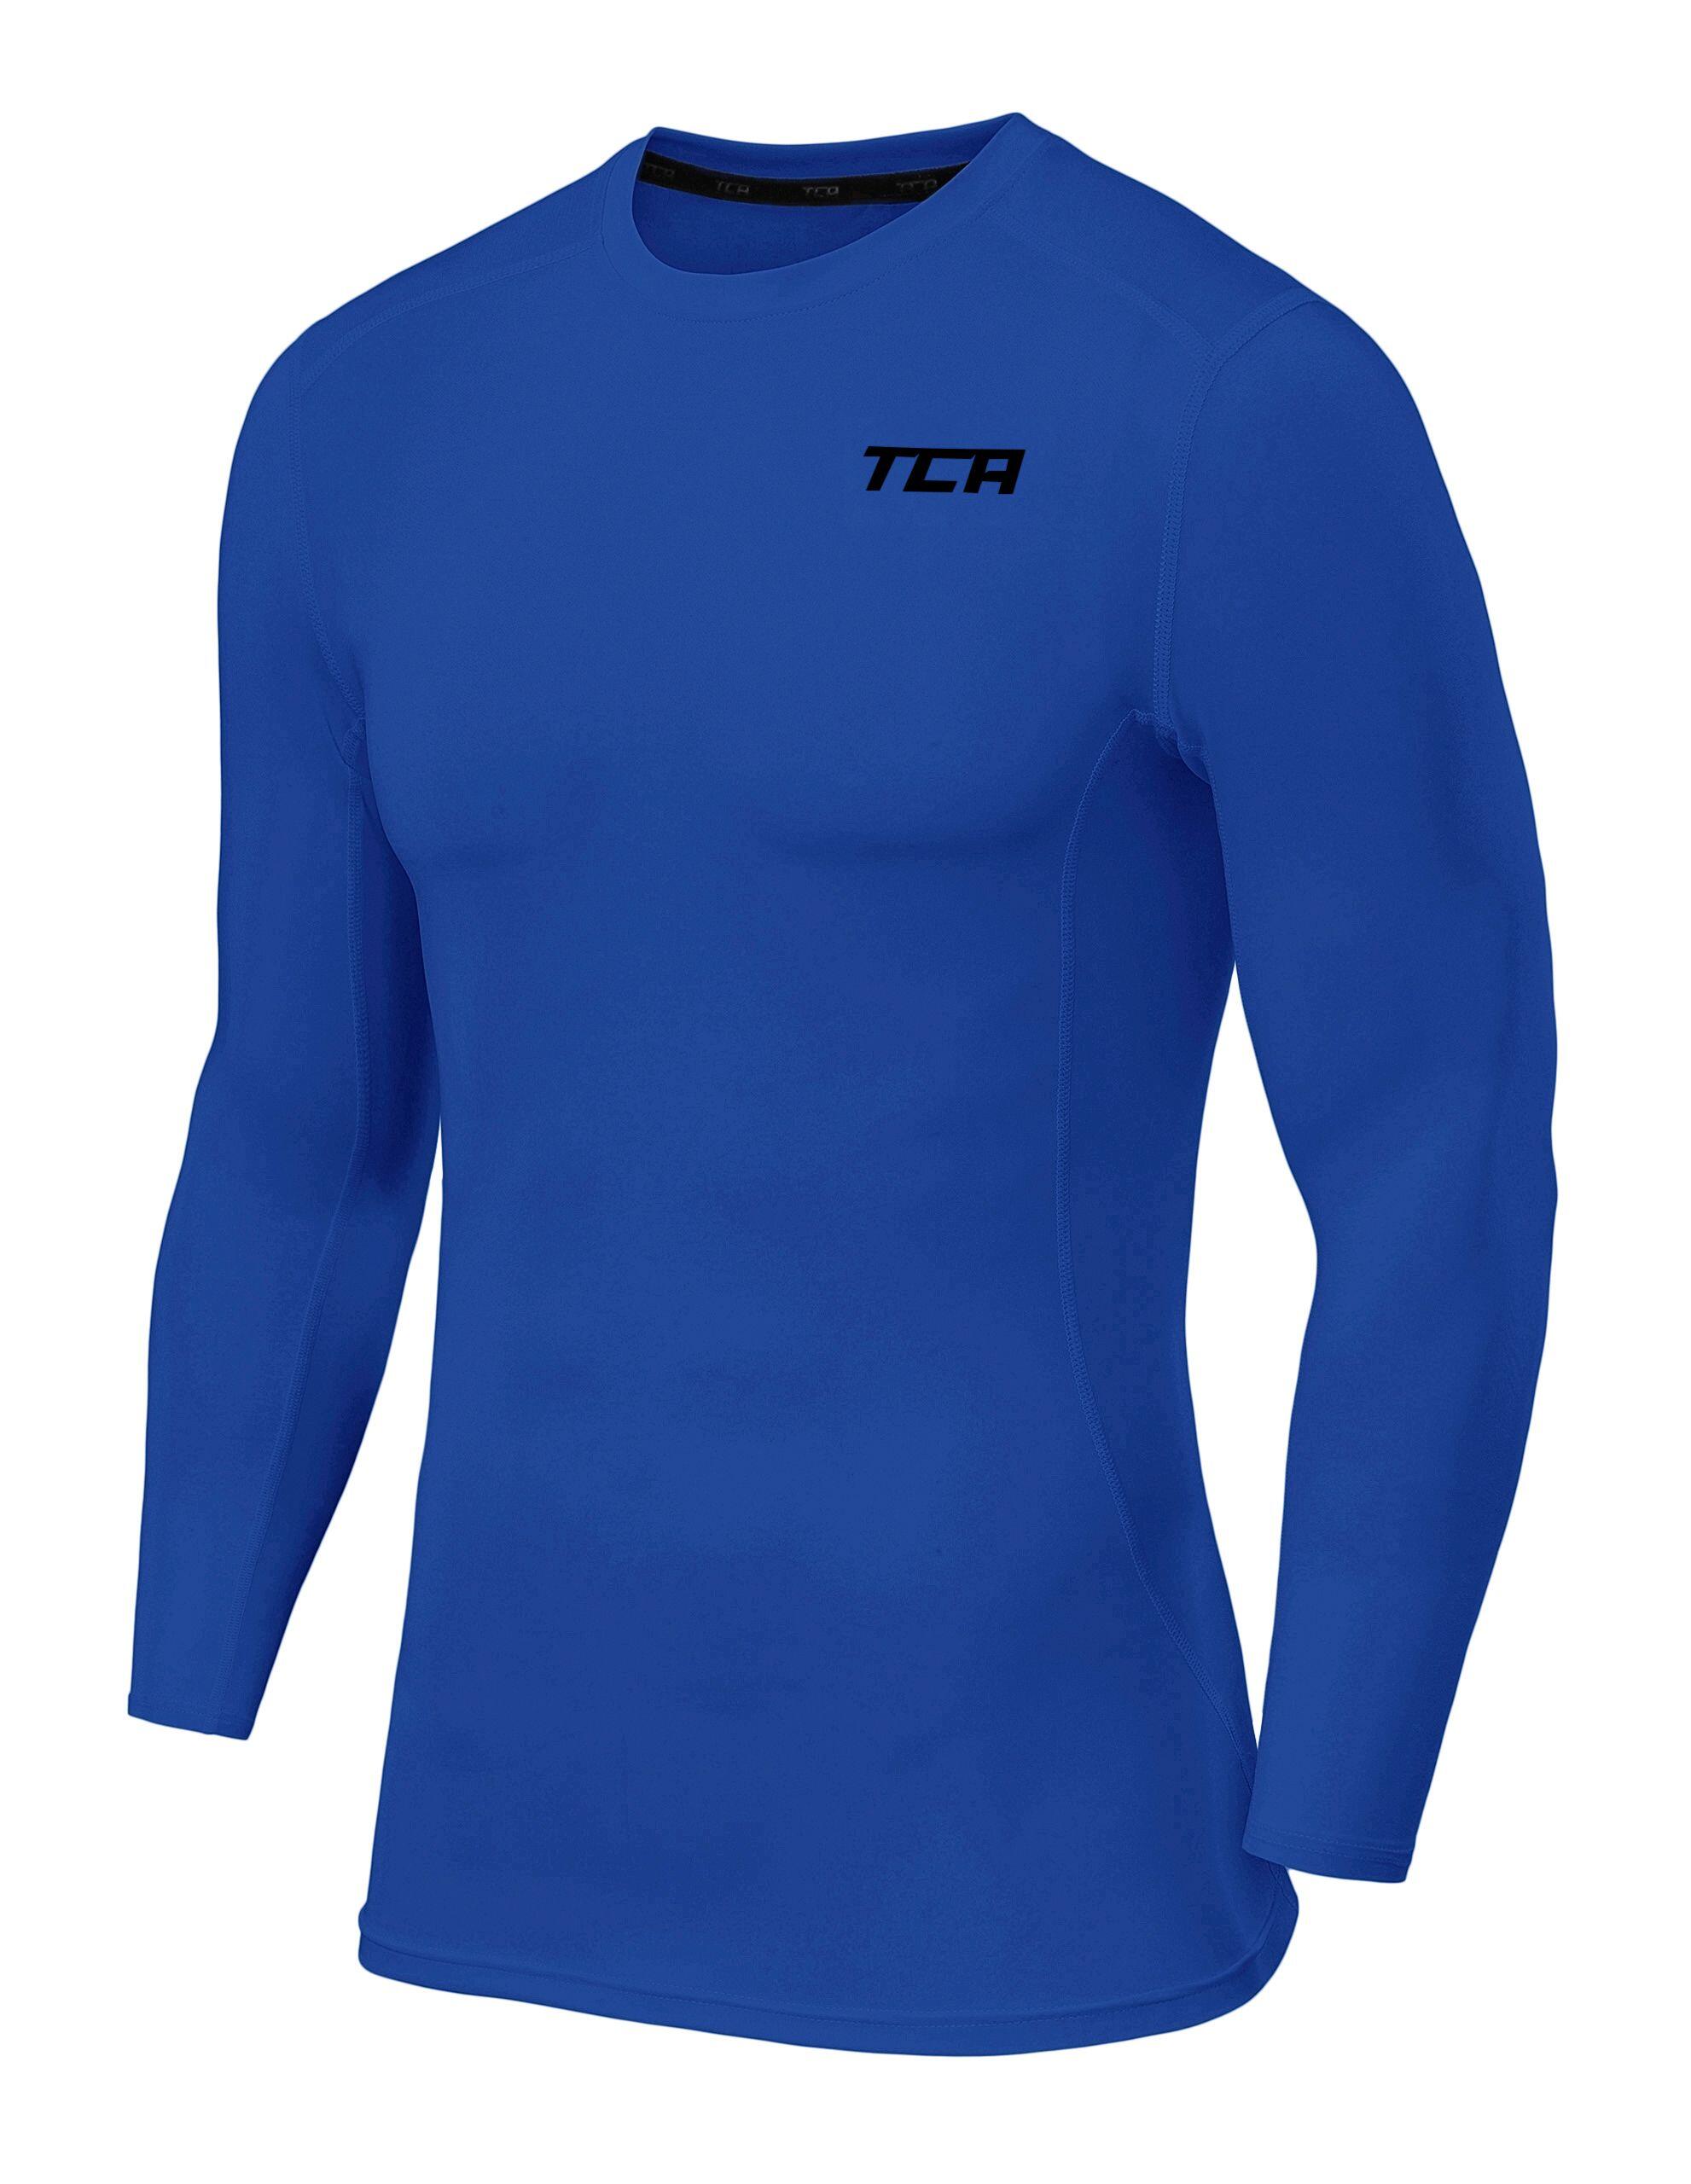 Boys' Performance Base Layer Compression Top - Dazzling Blue 2/5